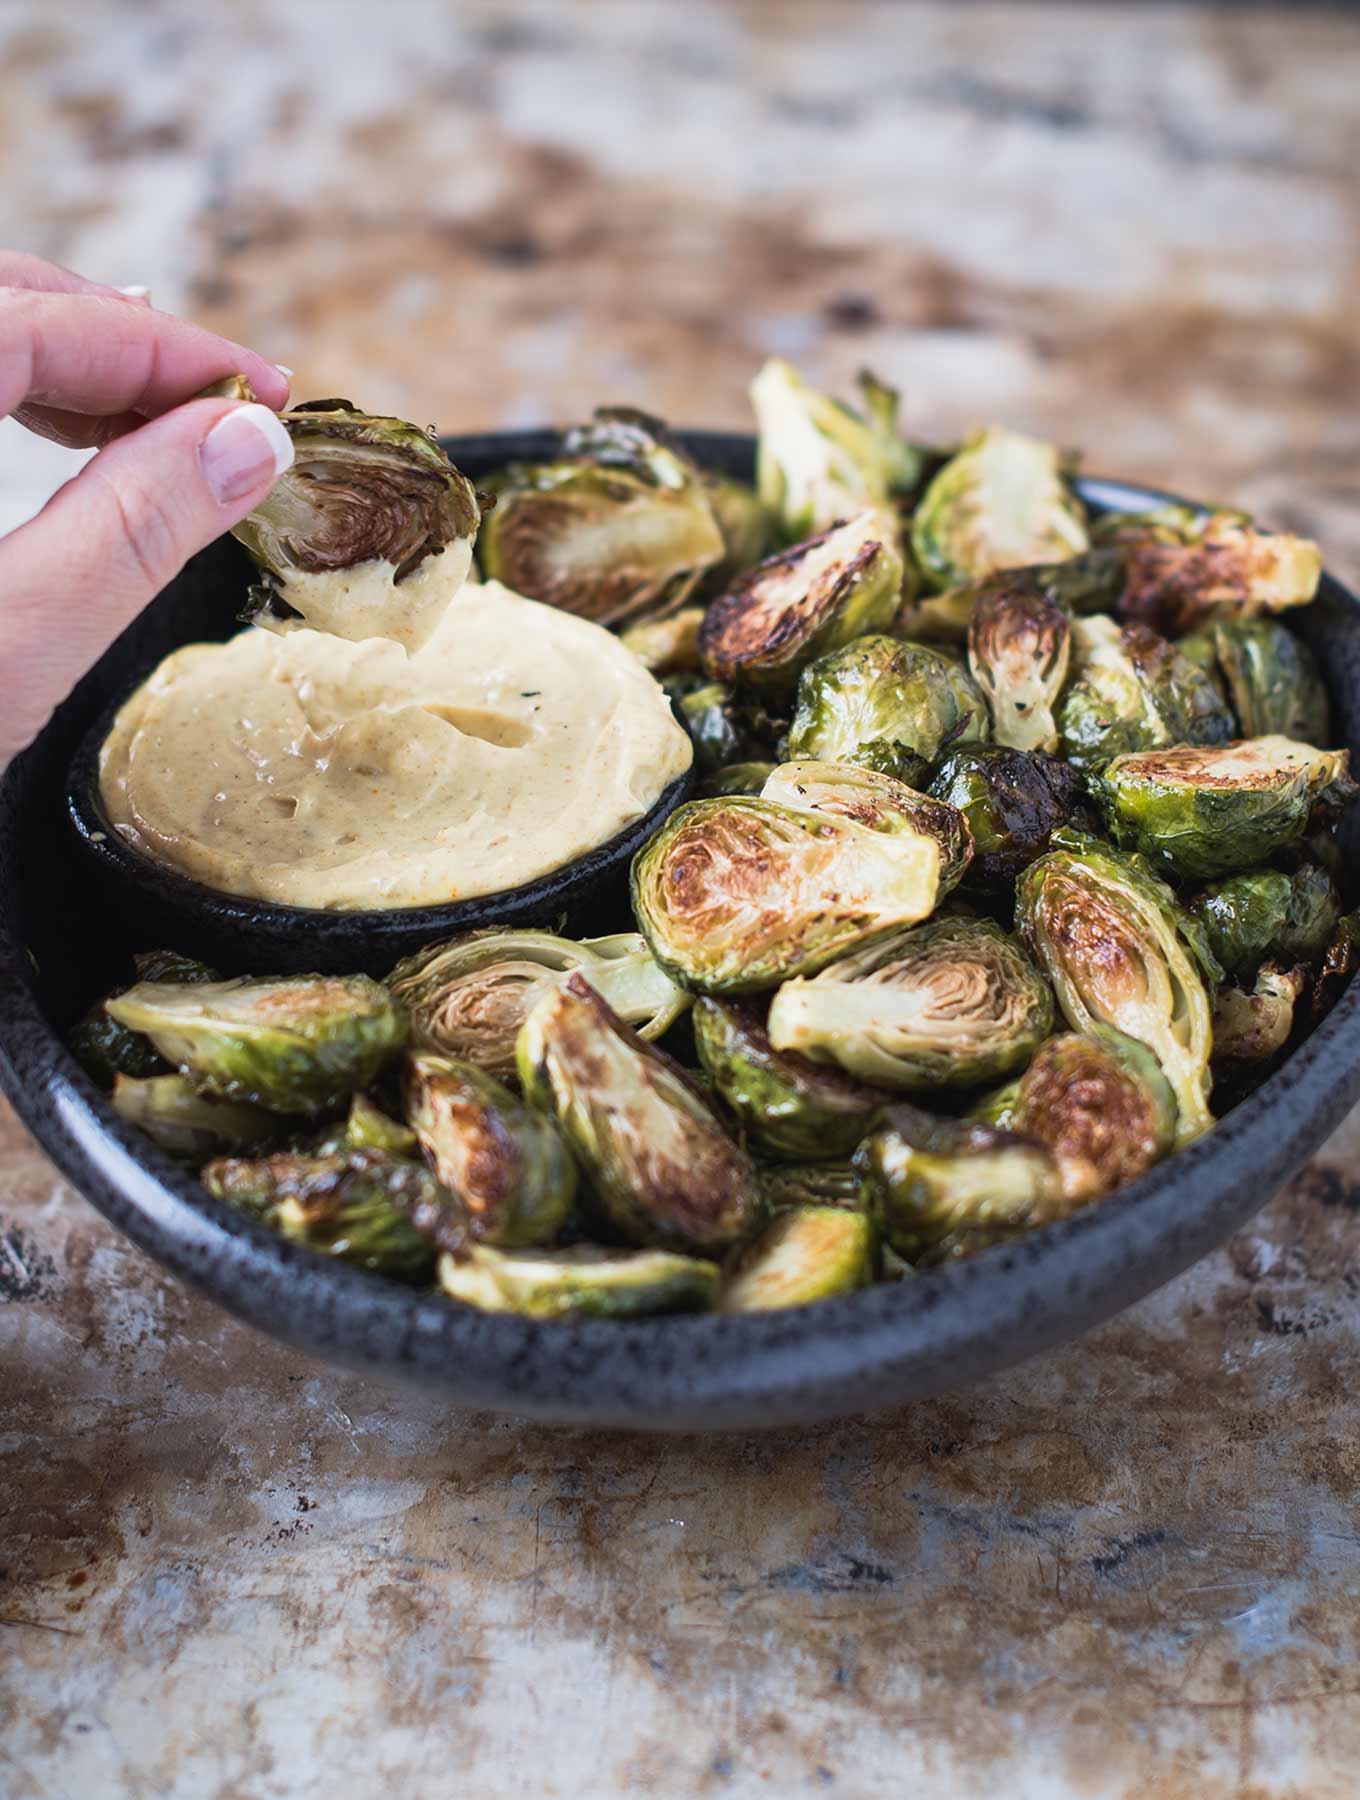 Roasted brussels sprouts with curry aioli